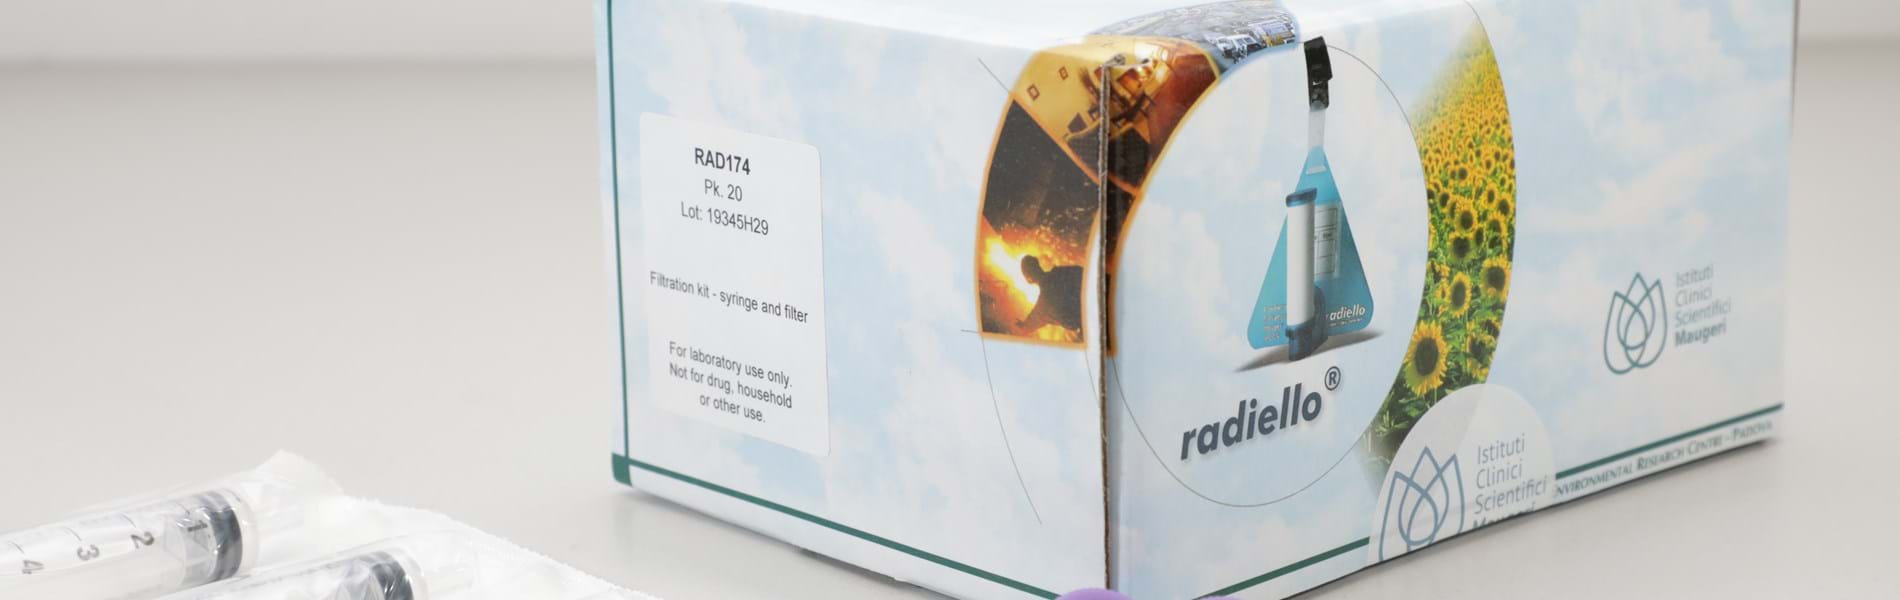 Markes International expands its range of passive sampling products with radiello®